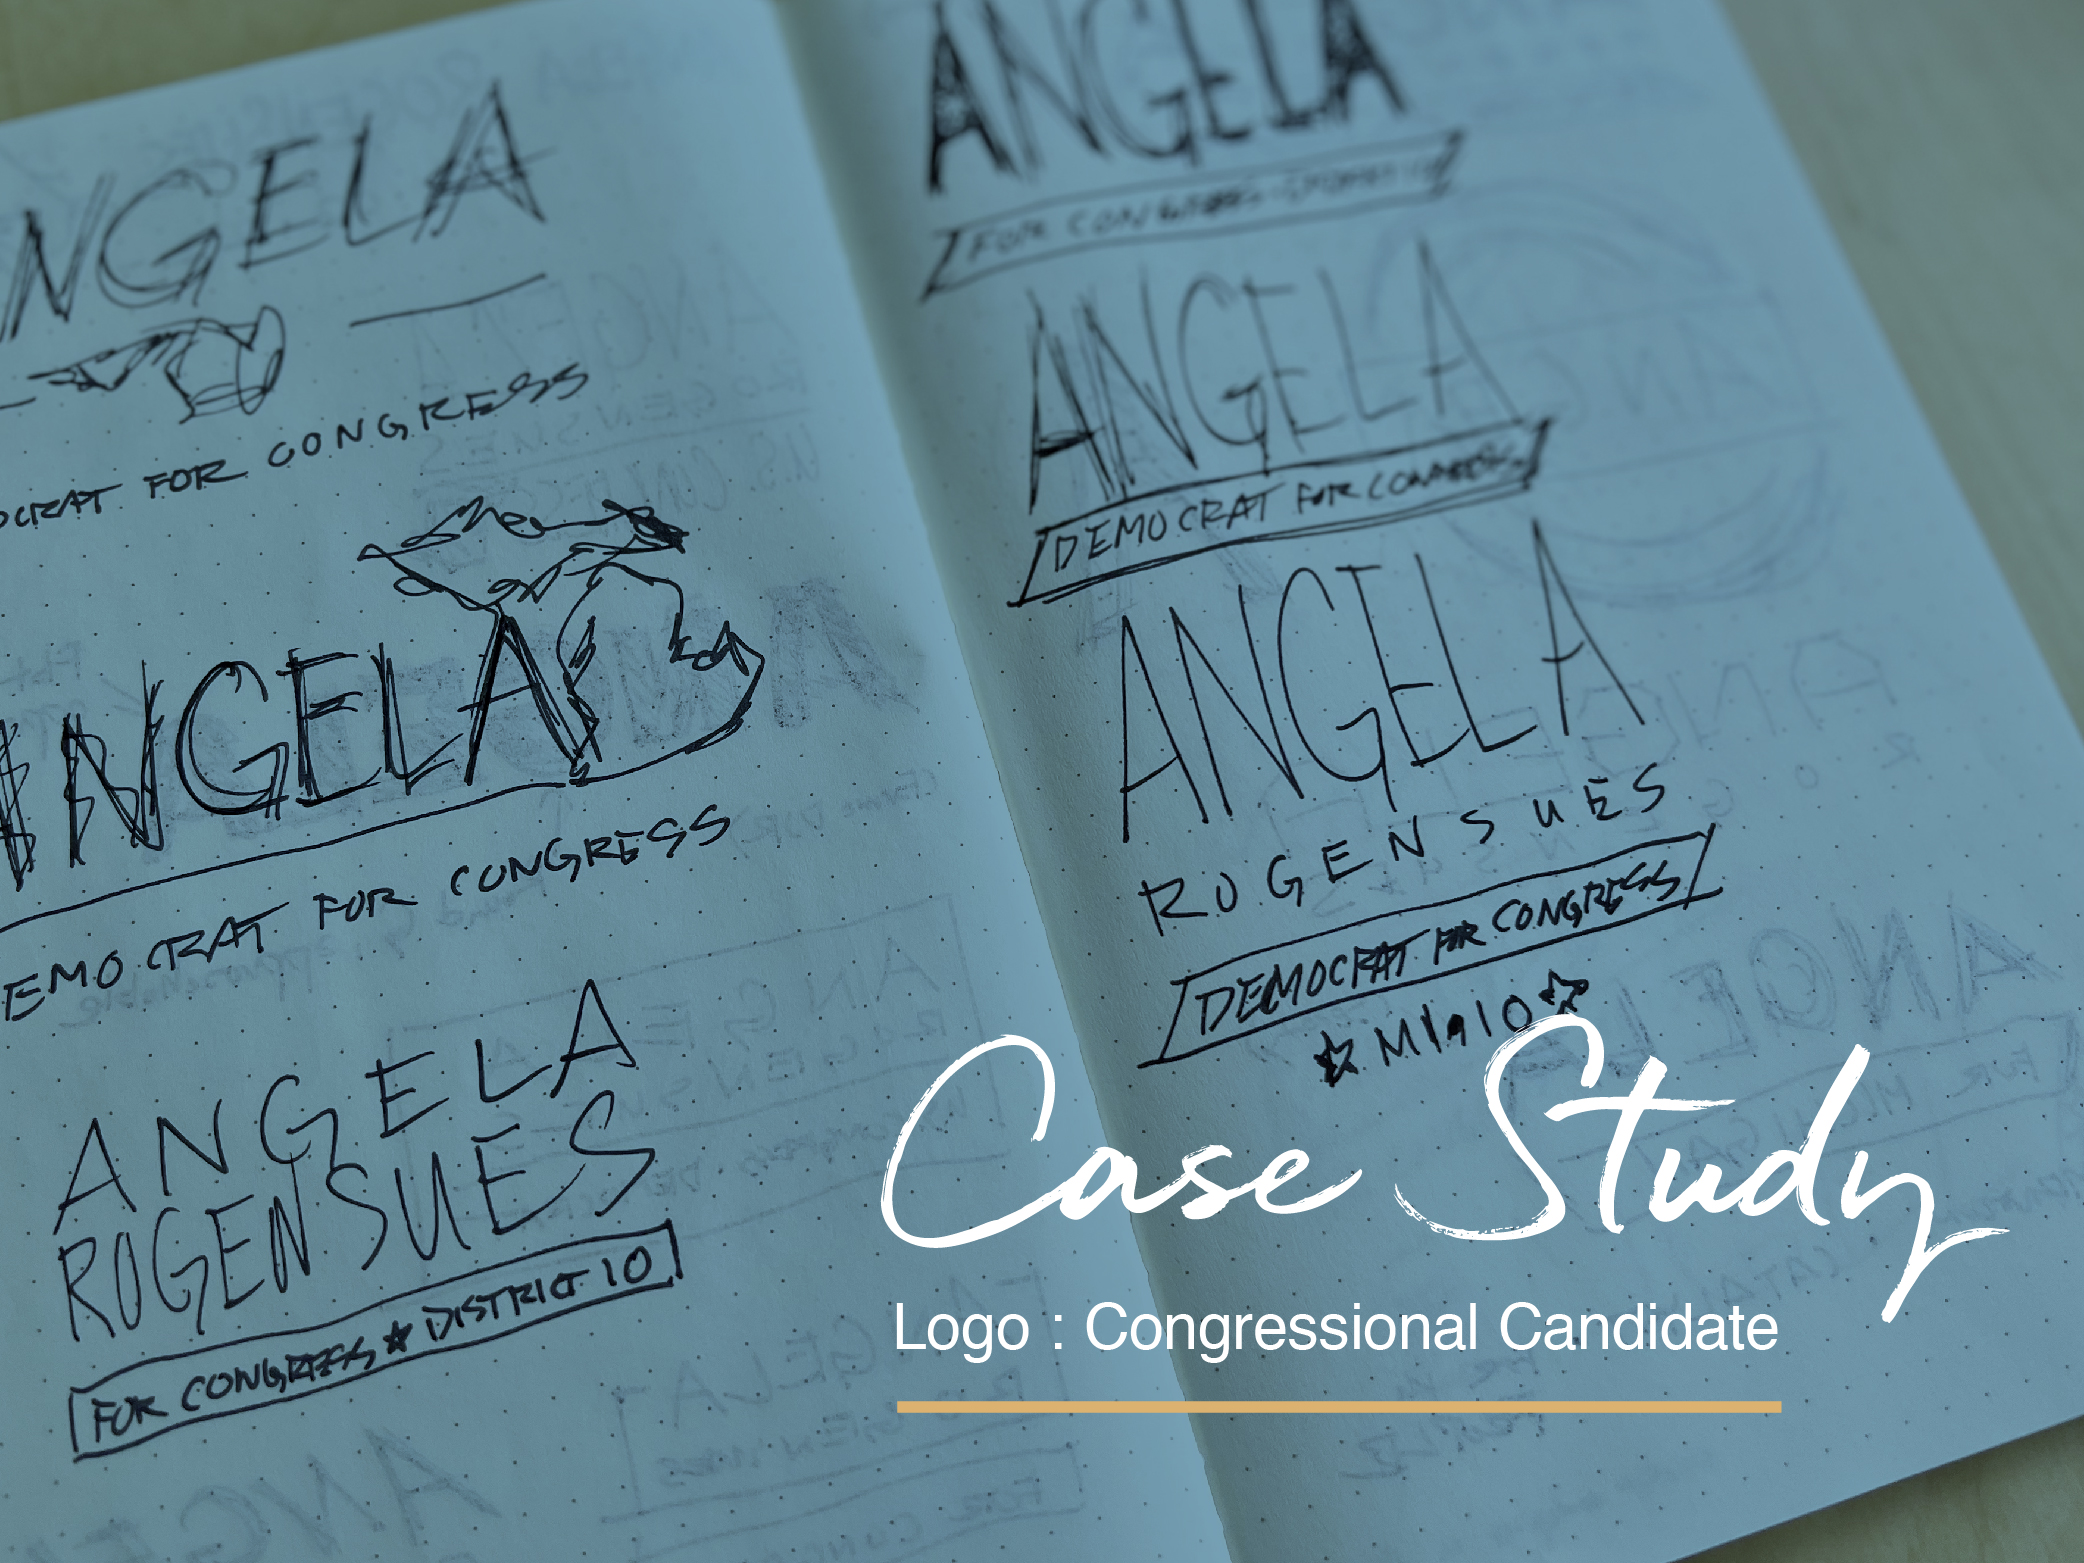 Open notebook with sketches of Angela Rogensues logo designs